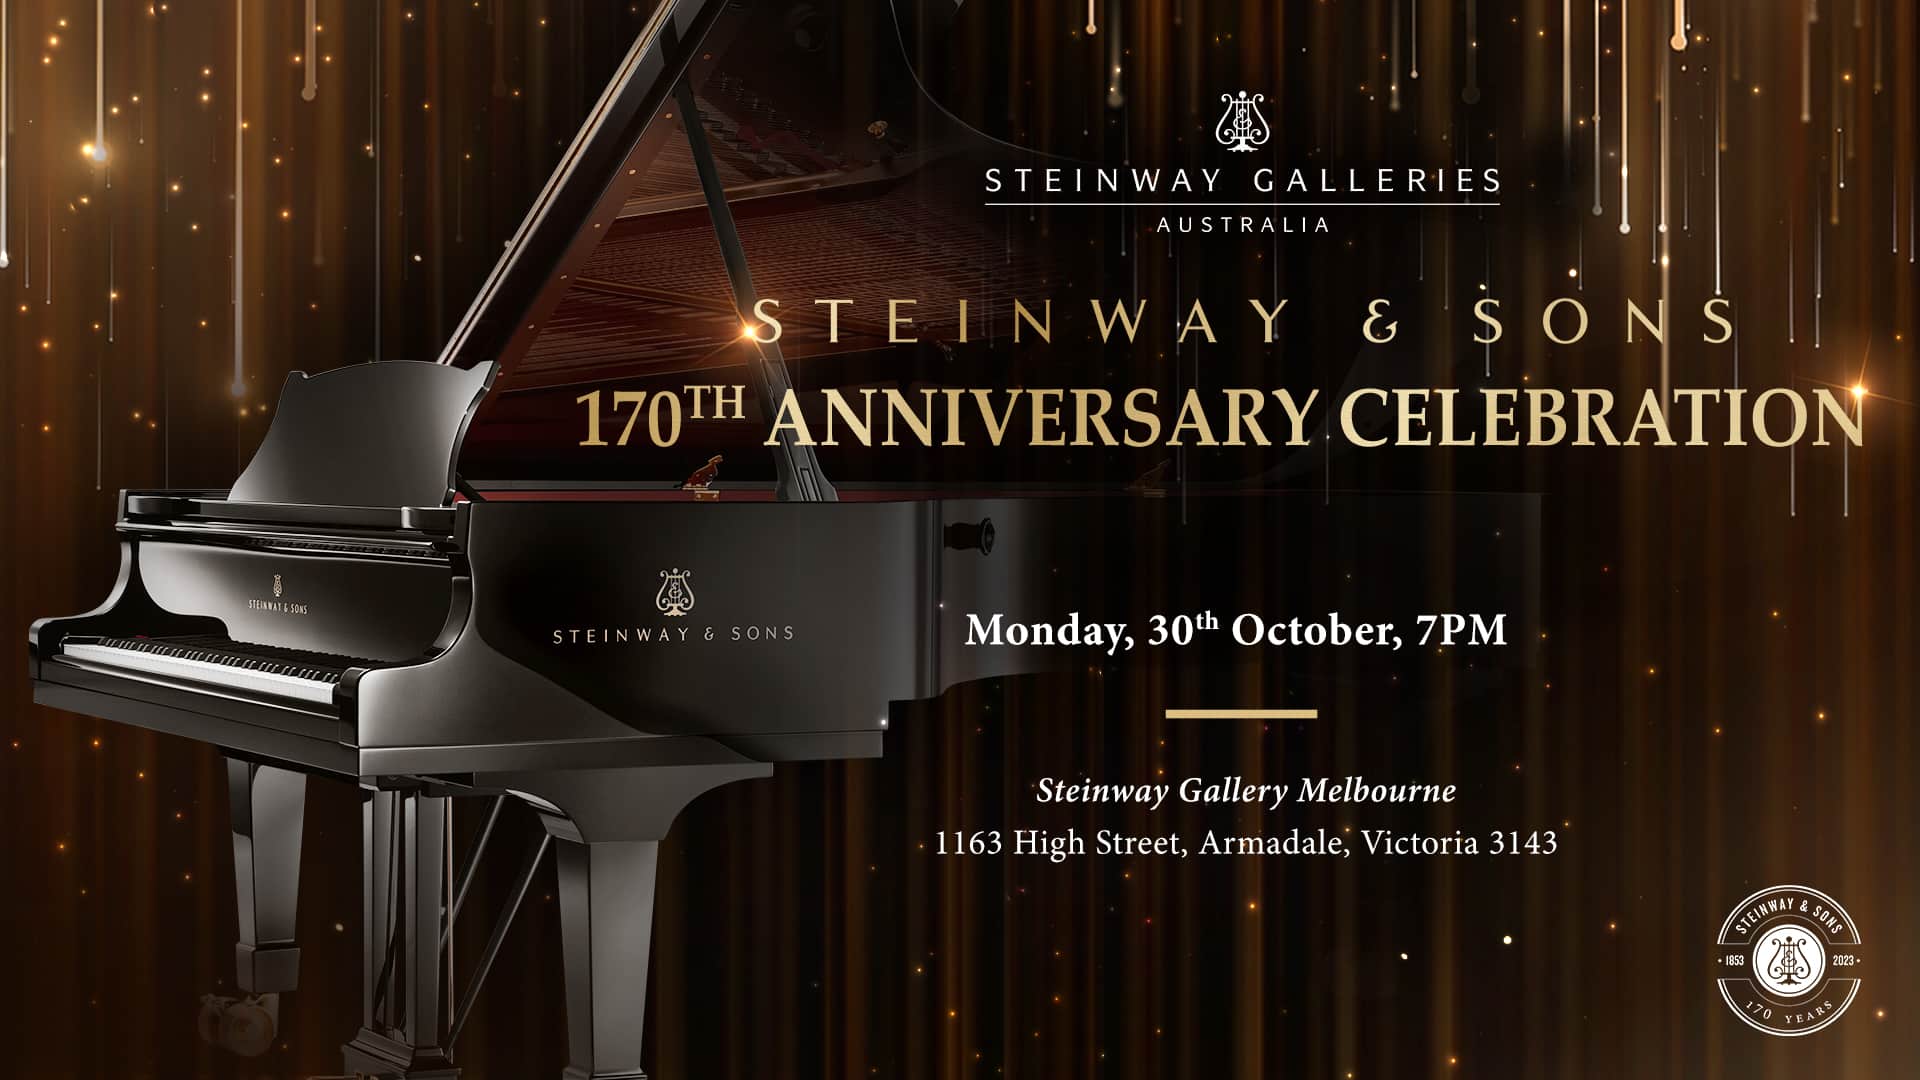 Steinway & Sons 170th Anniversary Celebration Event at Steinway Gallery Melbourne